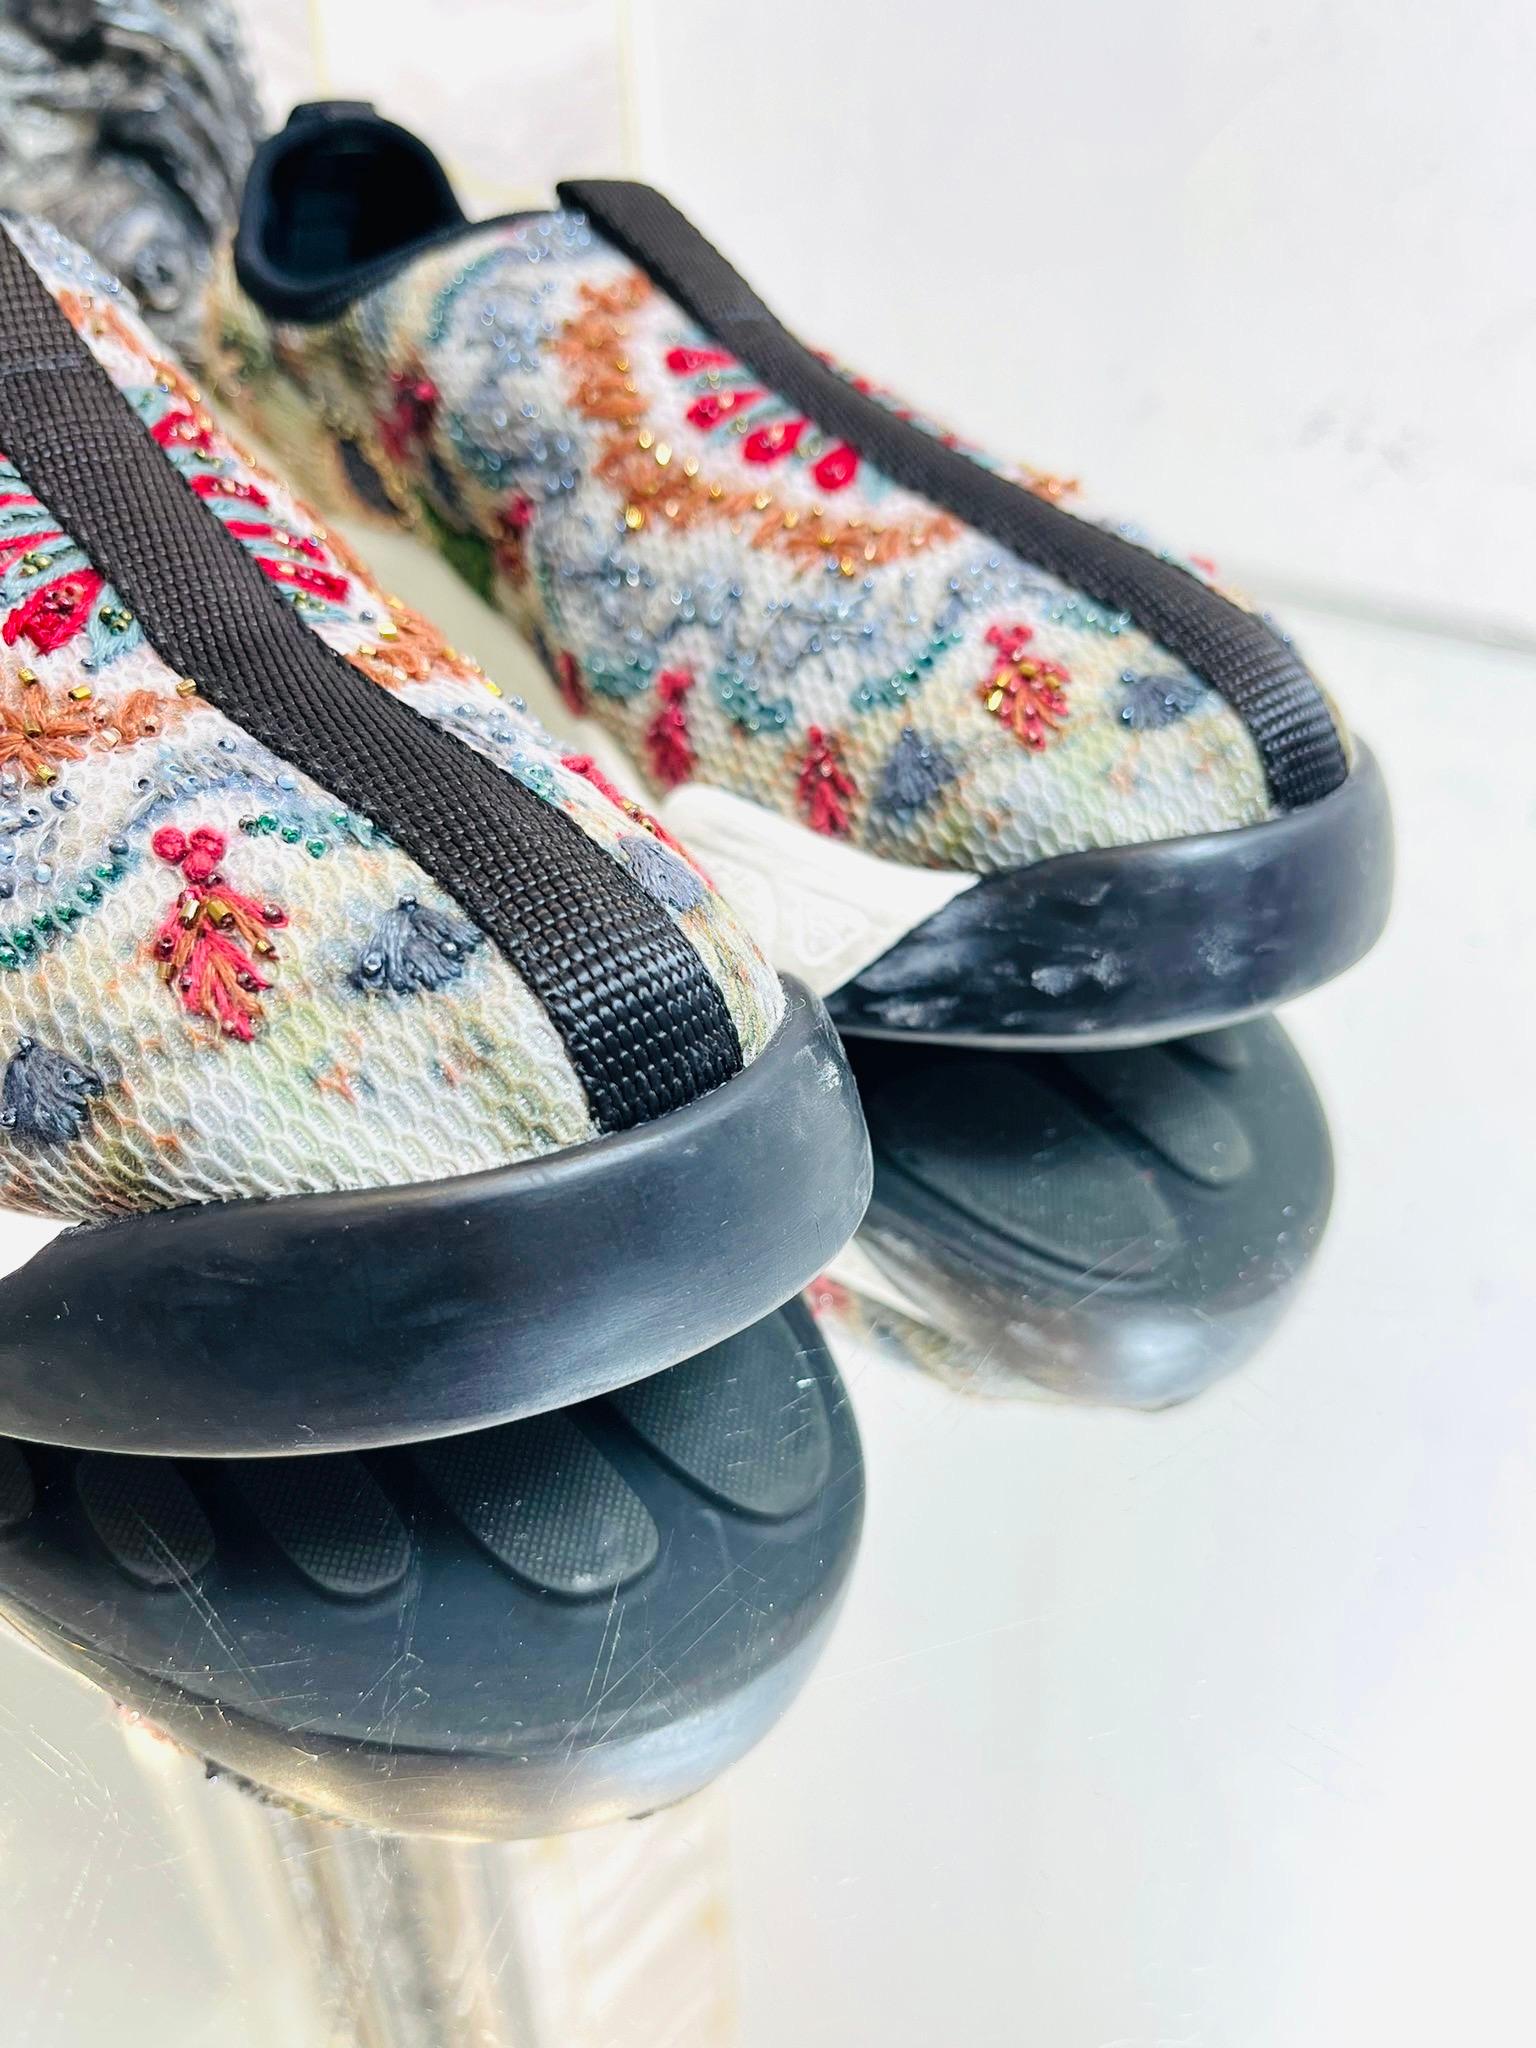 Dior Bead Embroidered Mesh Sneakers For Sale 4